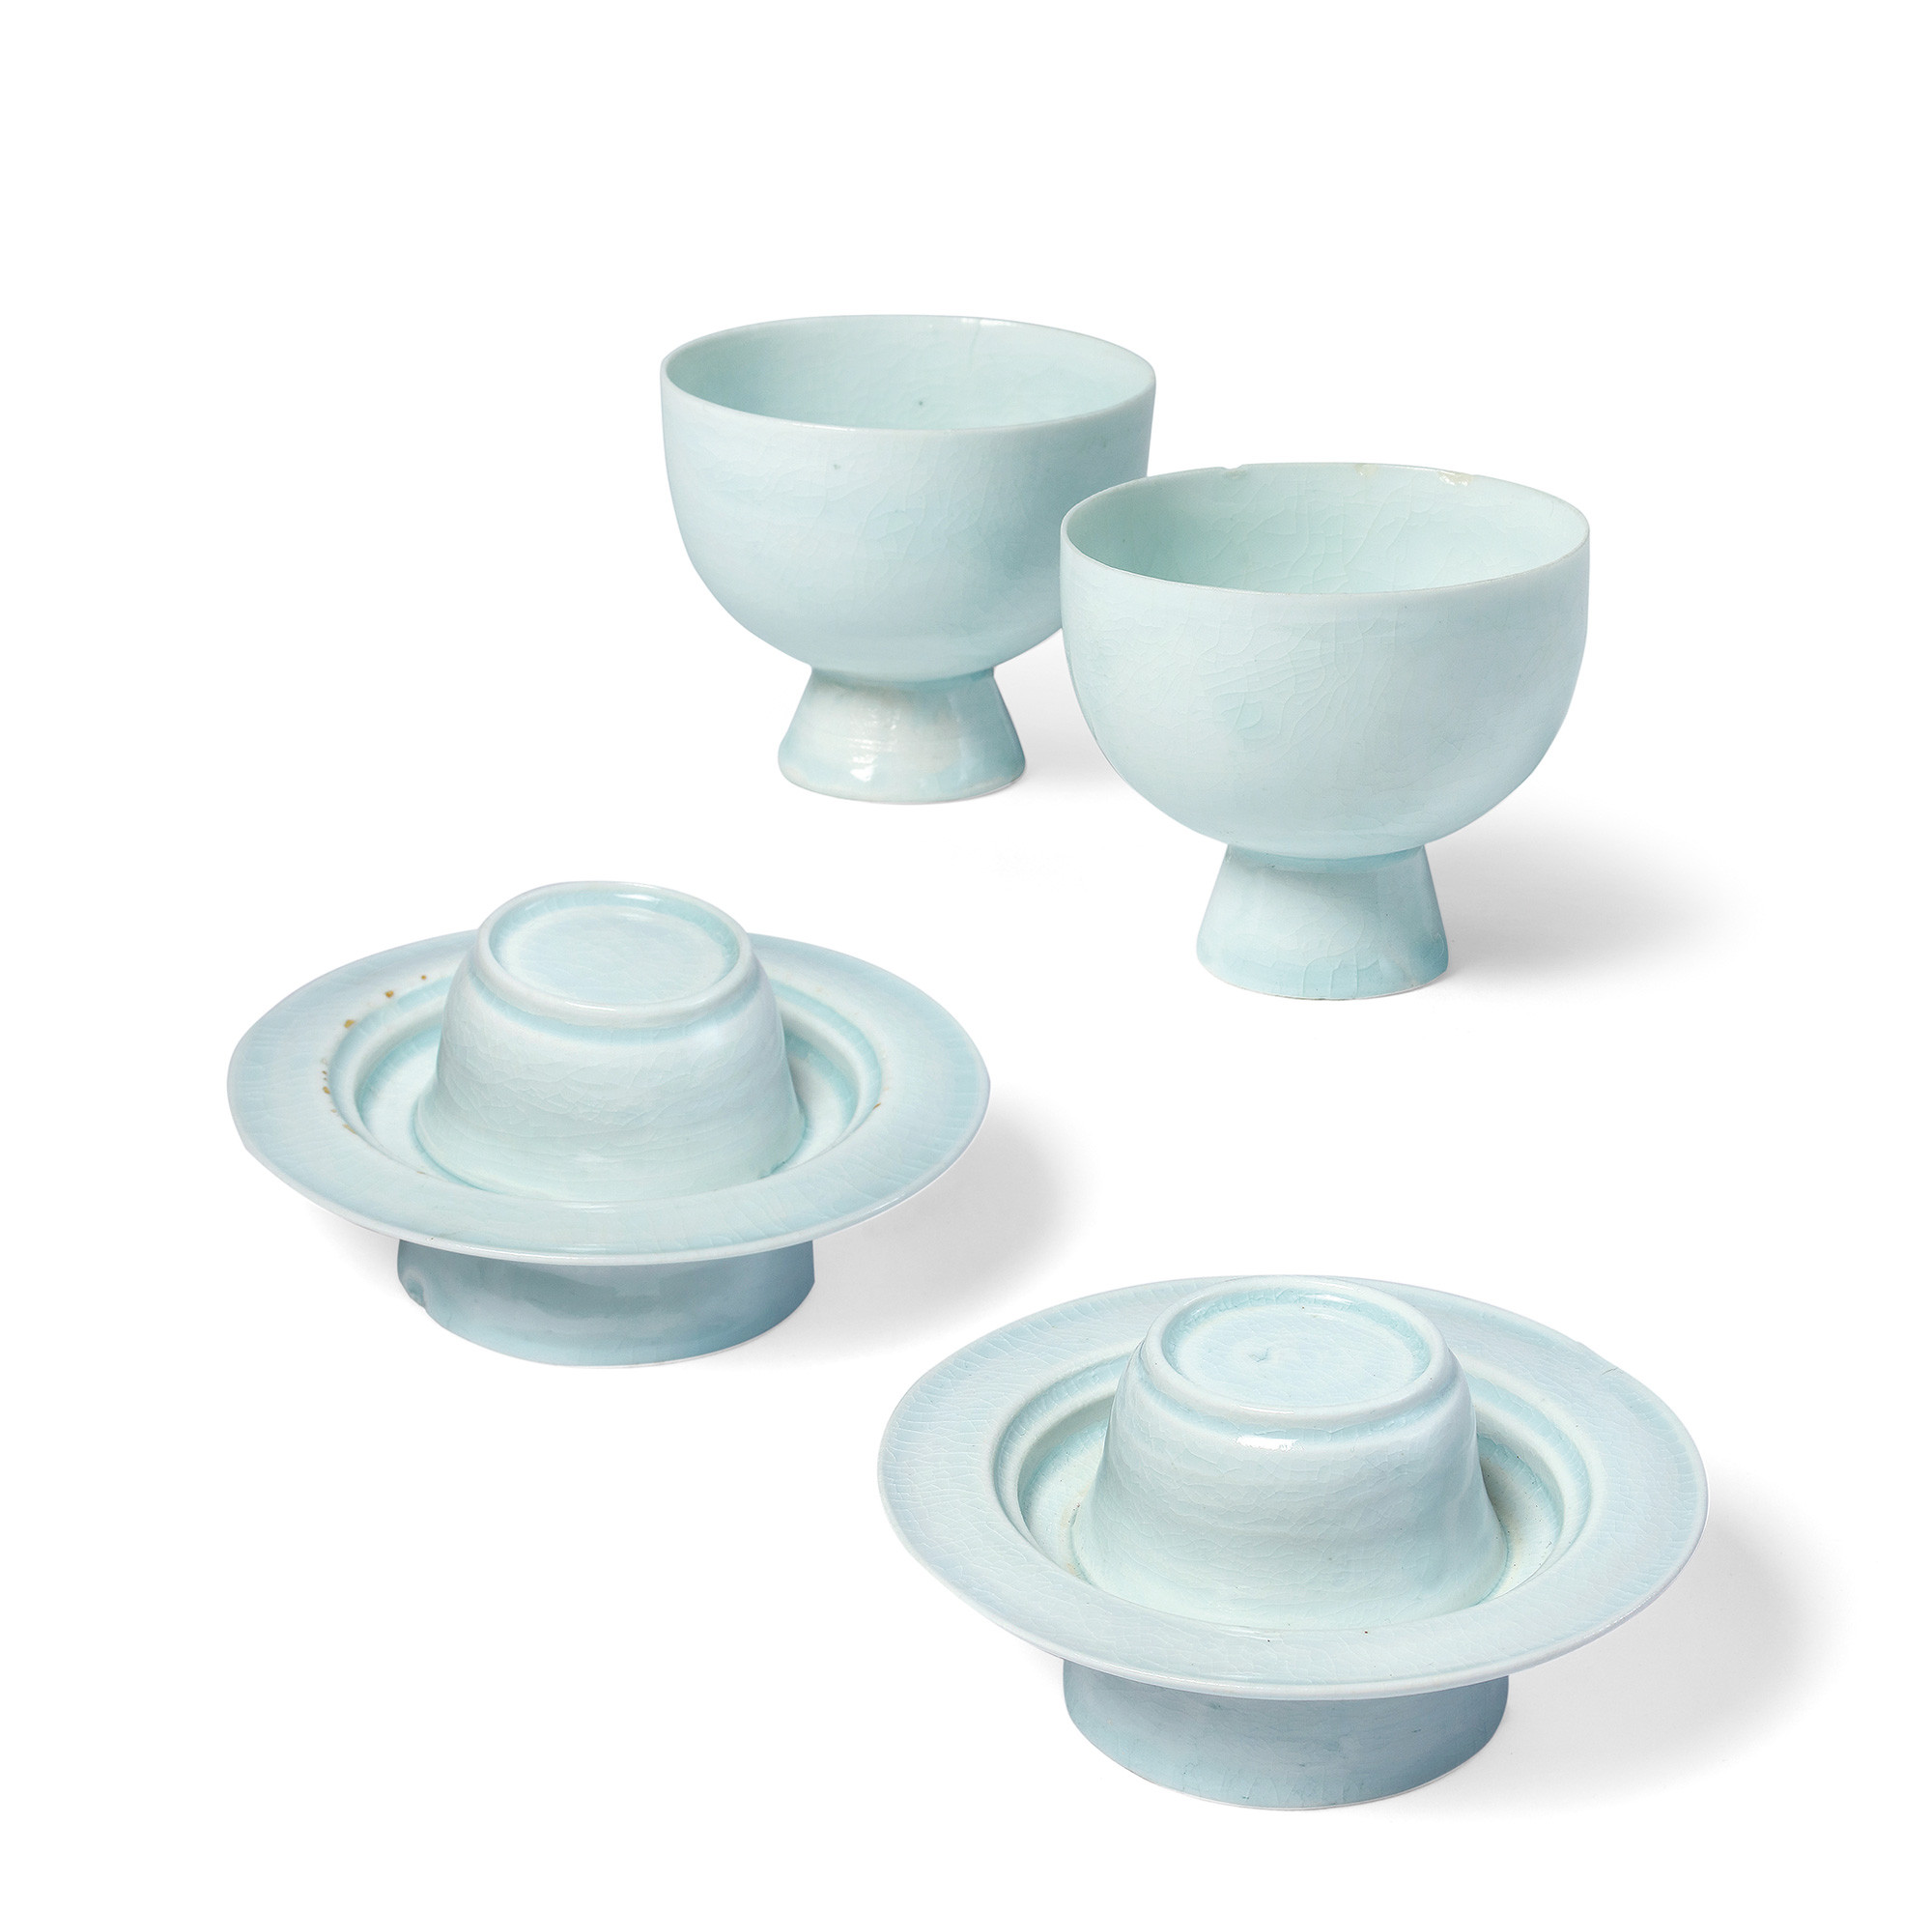 A PAIR OF CELADON-GLAZED CUP AND CUP-STAND